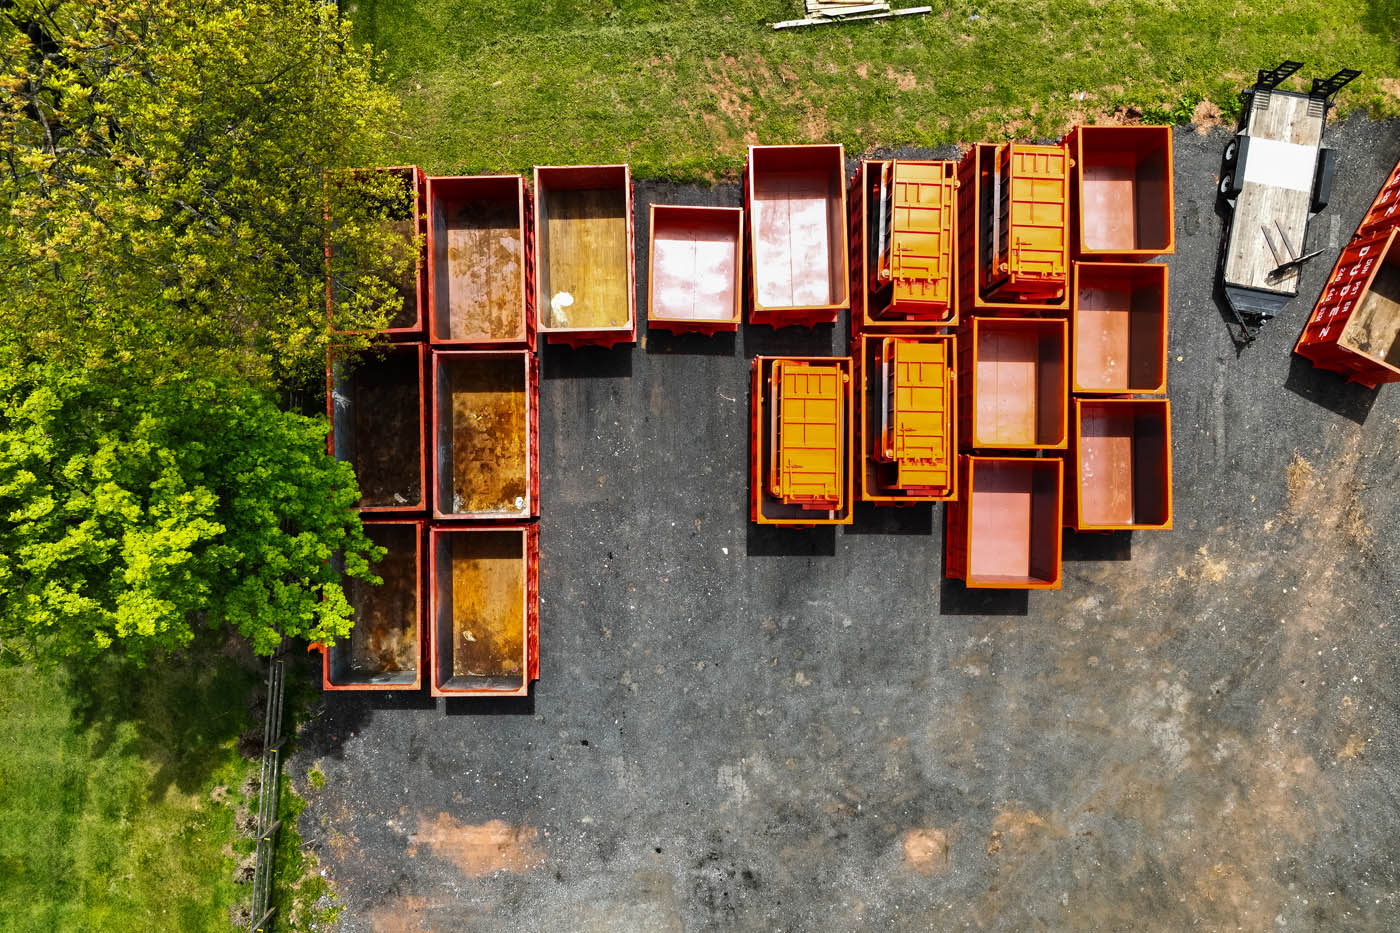 
				Sky view of a holding lot for Rochester commercial dumpsters at Dumpster Dudez.		
			